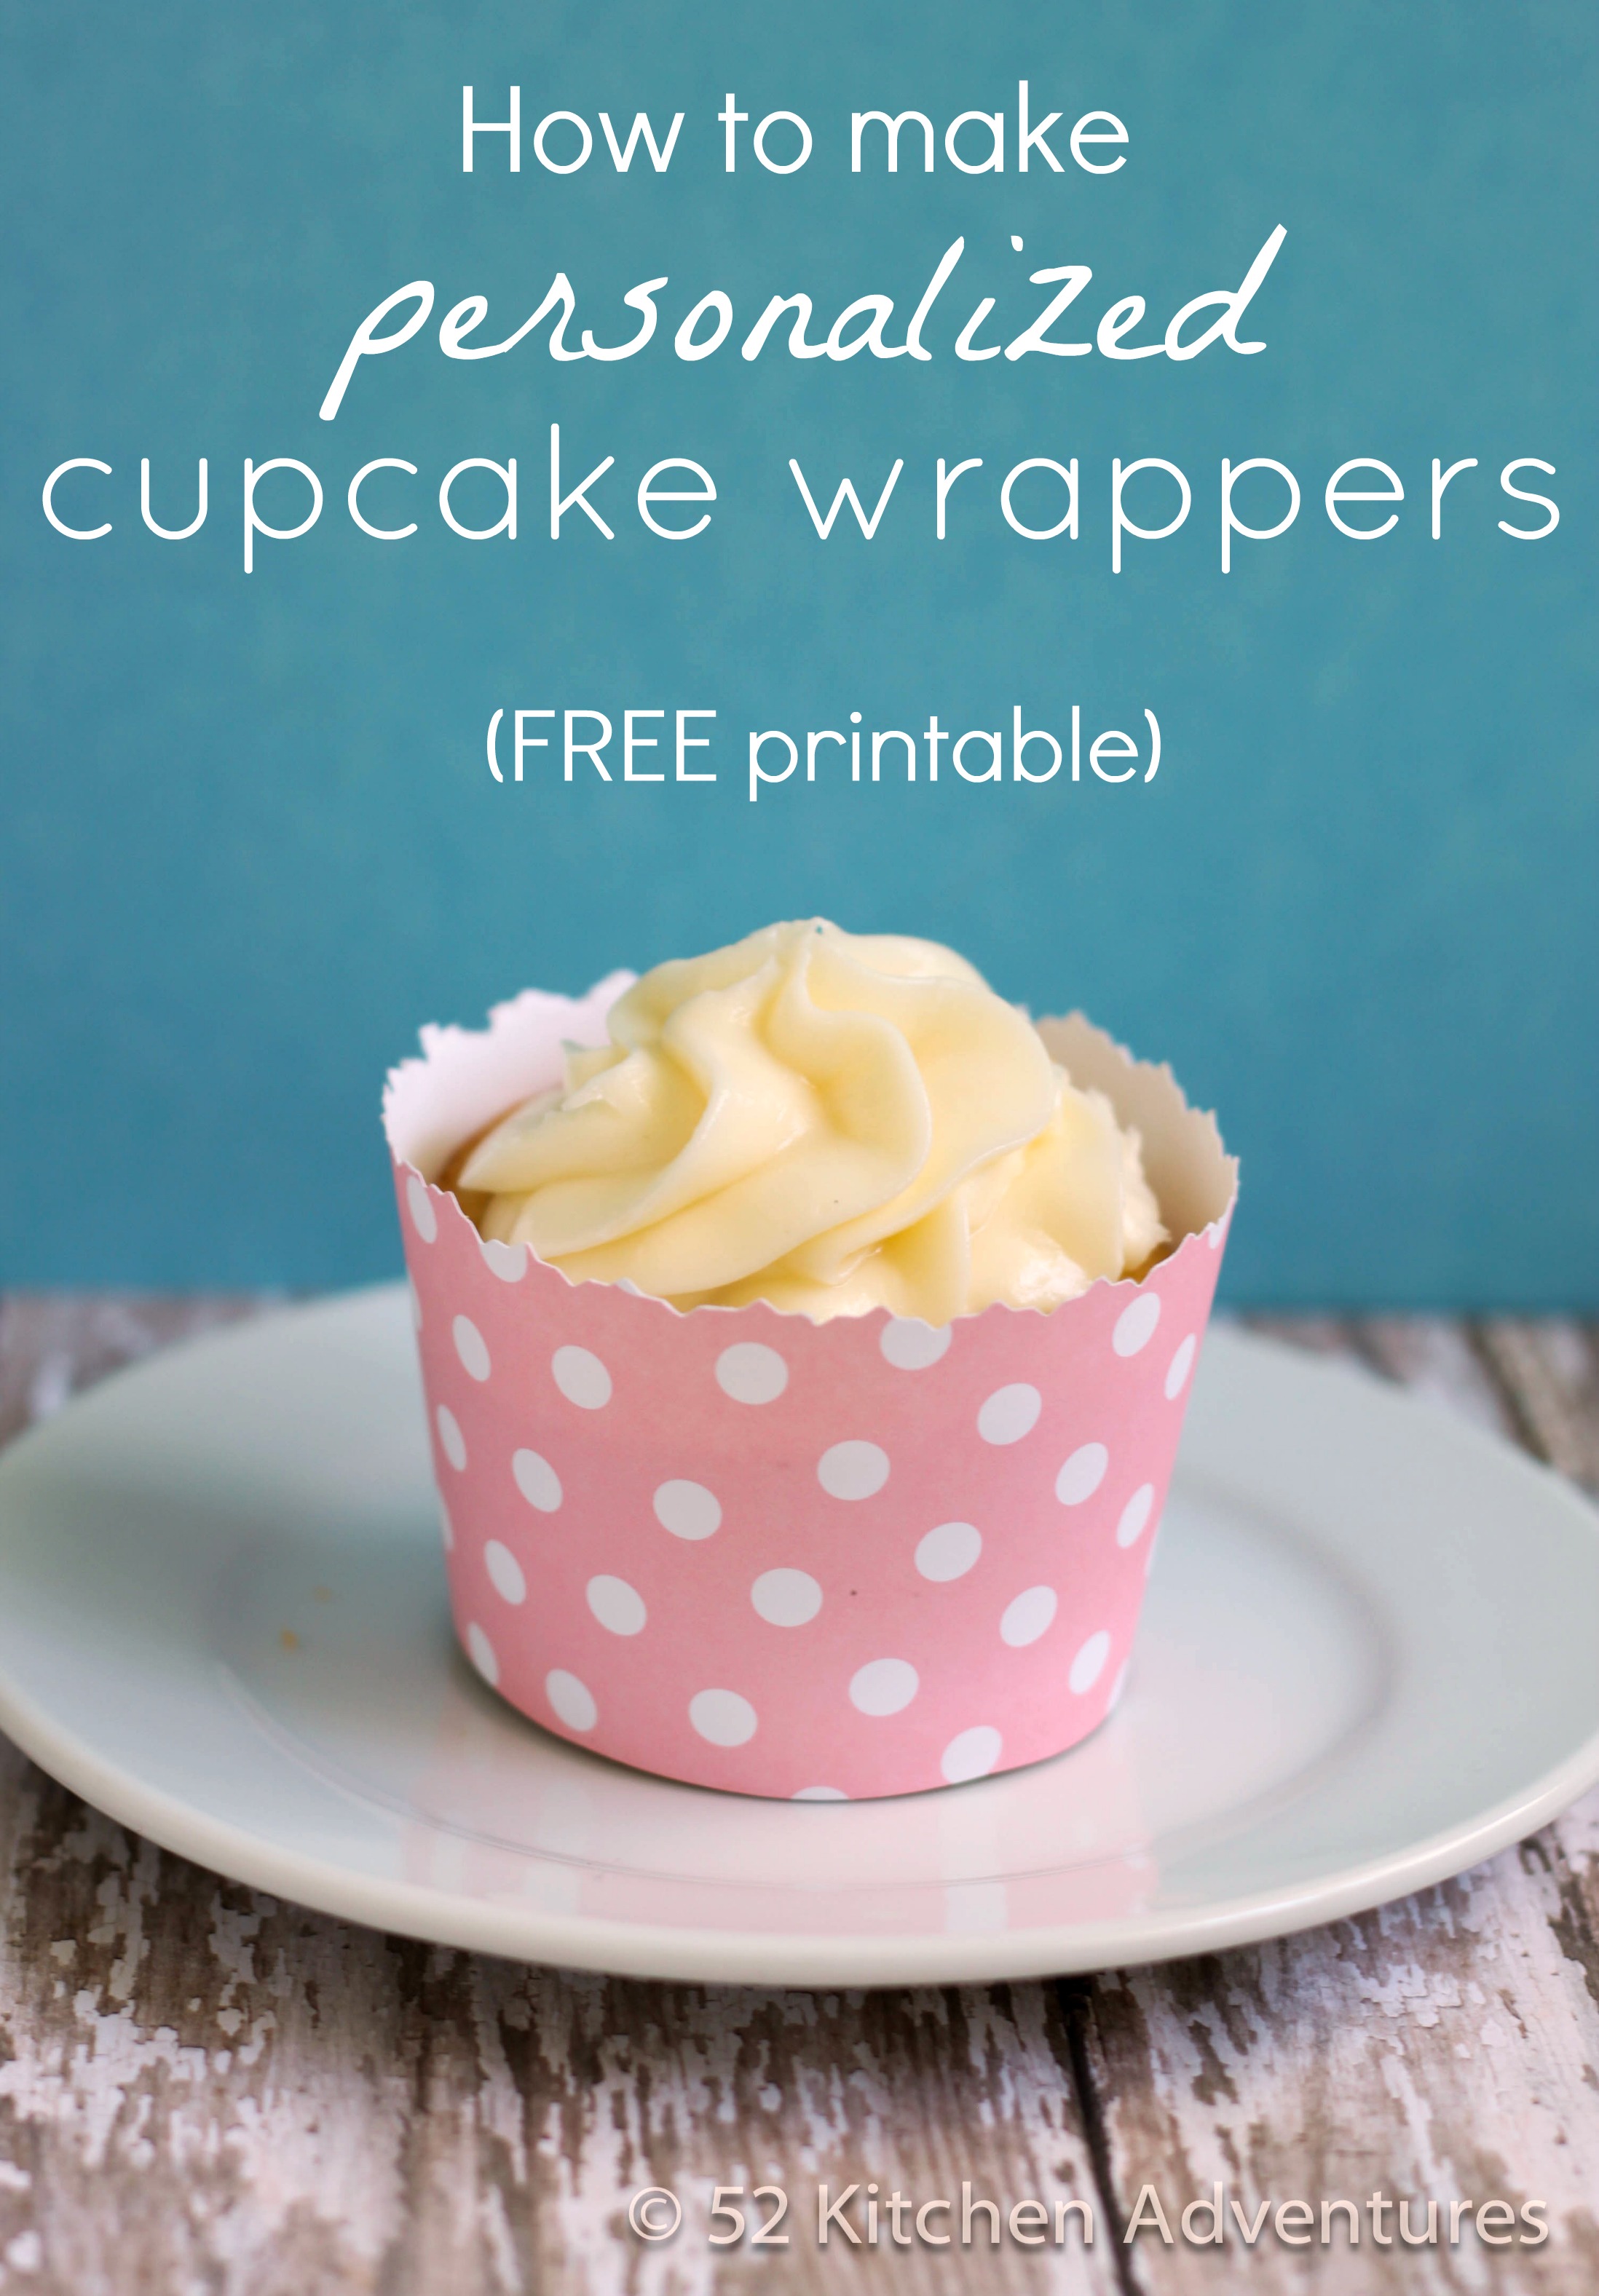 How to make personalized cupcake wrappers